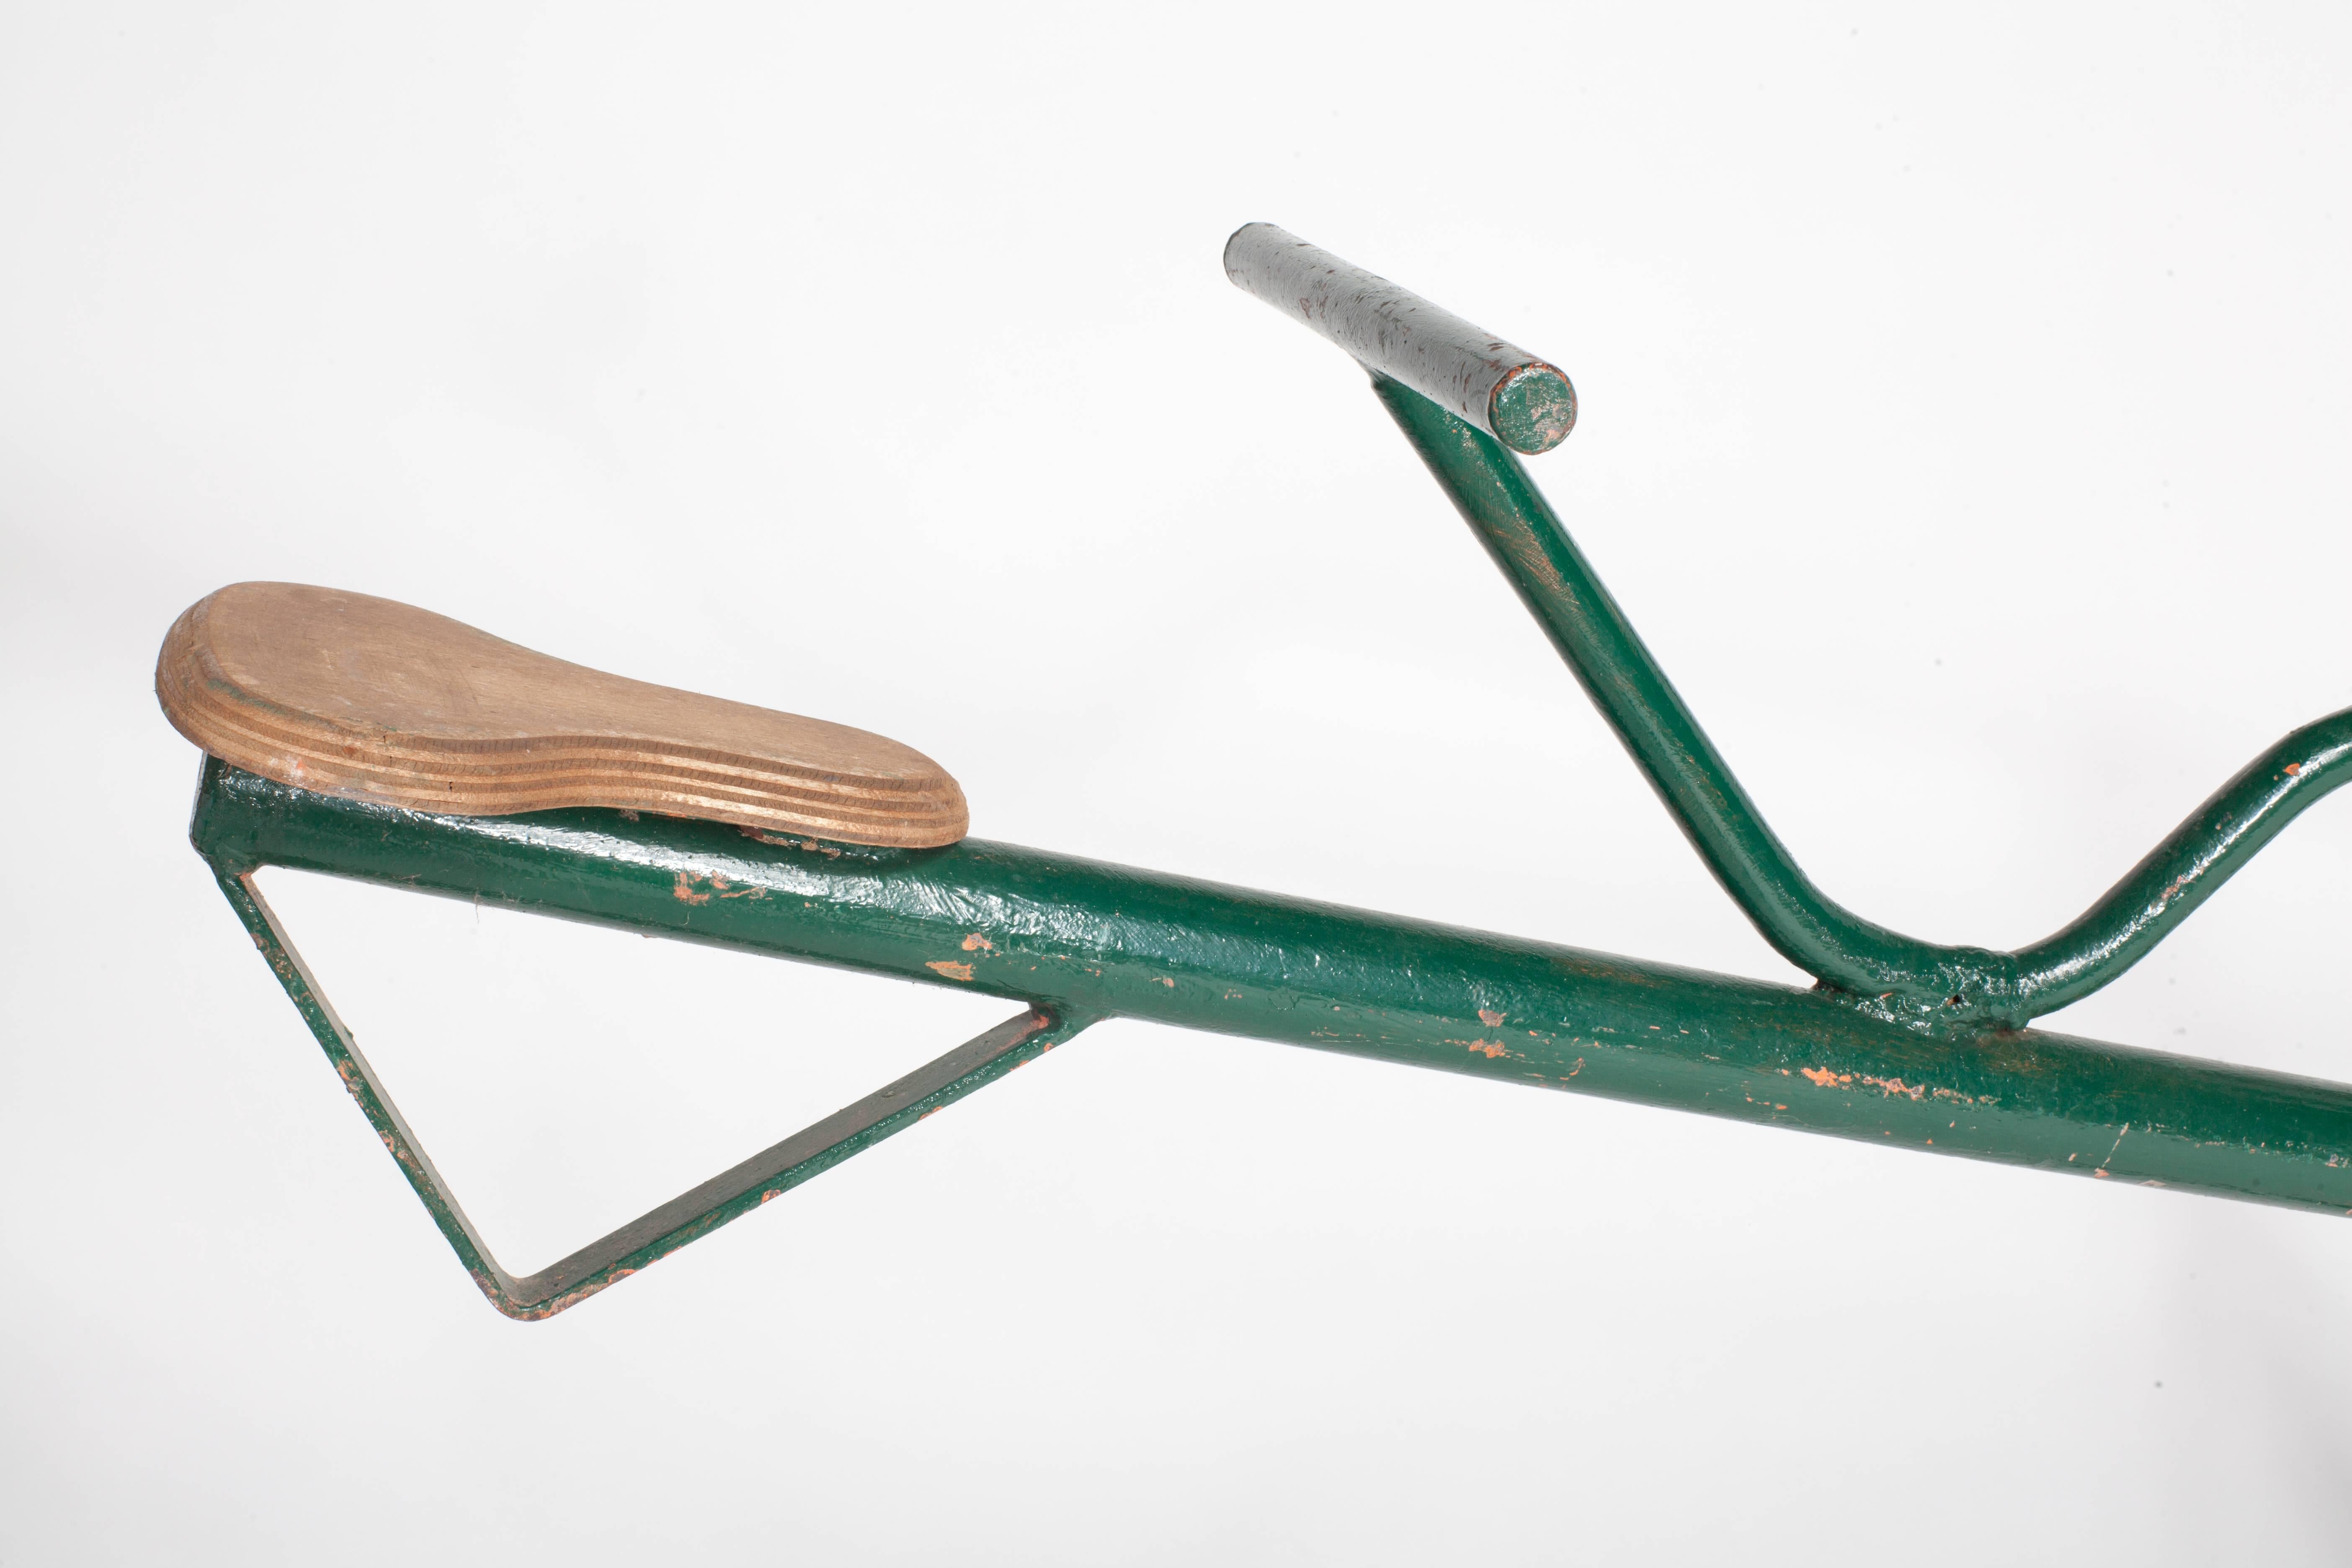 Vintage French green metal see saw with two wooden seats.